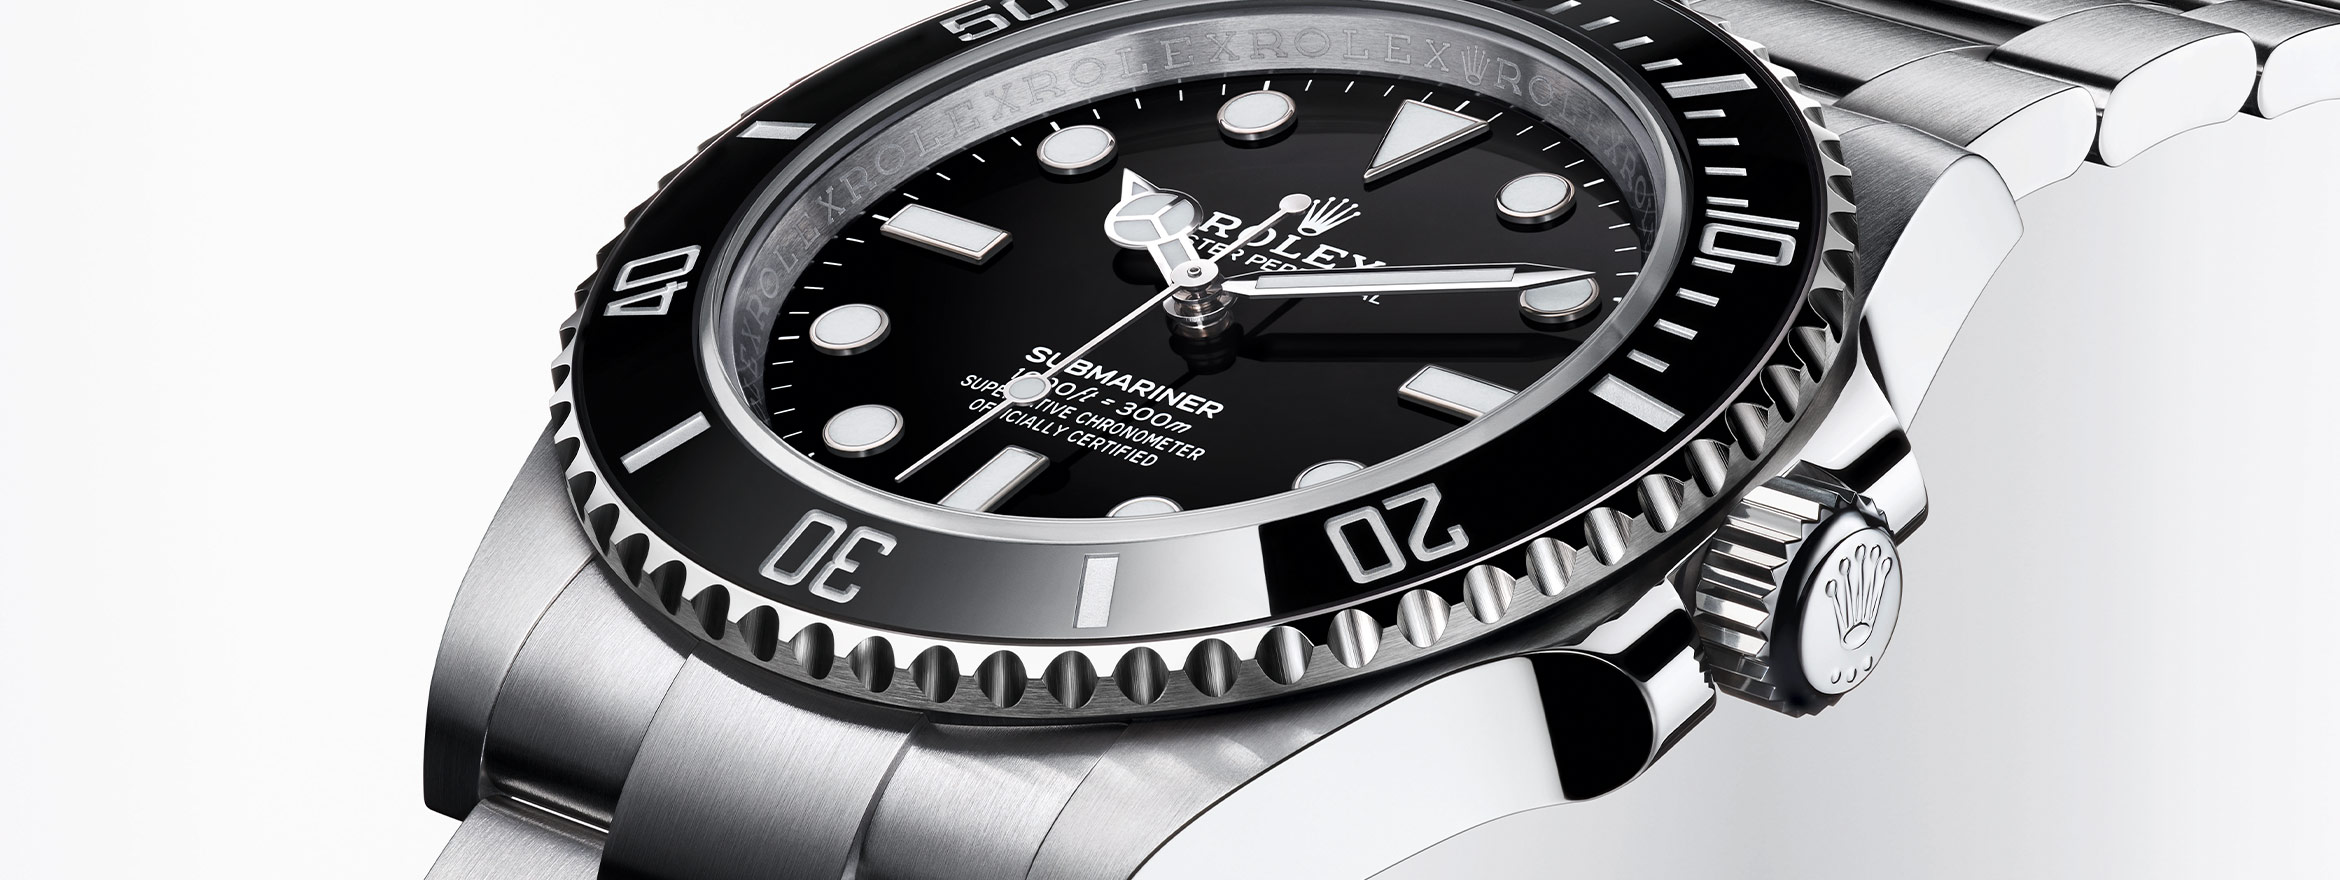 Rolex New Watches 2020: Oyster Perpetual Submariner - PMT The Hour ...